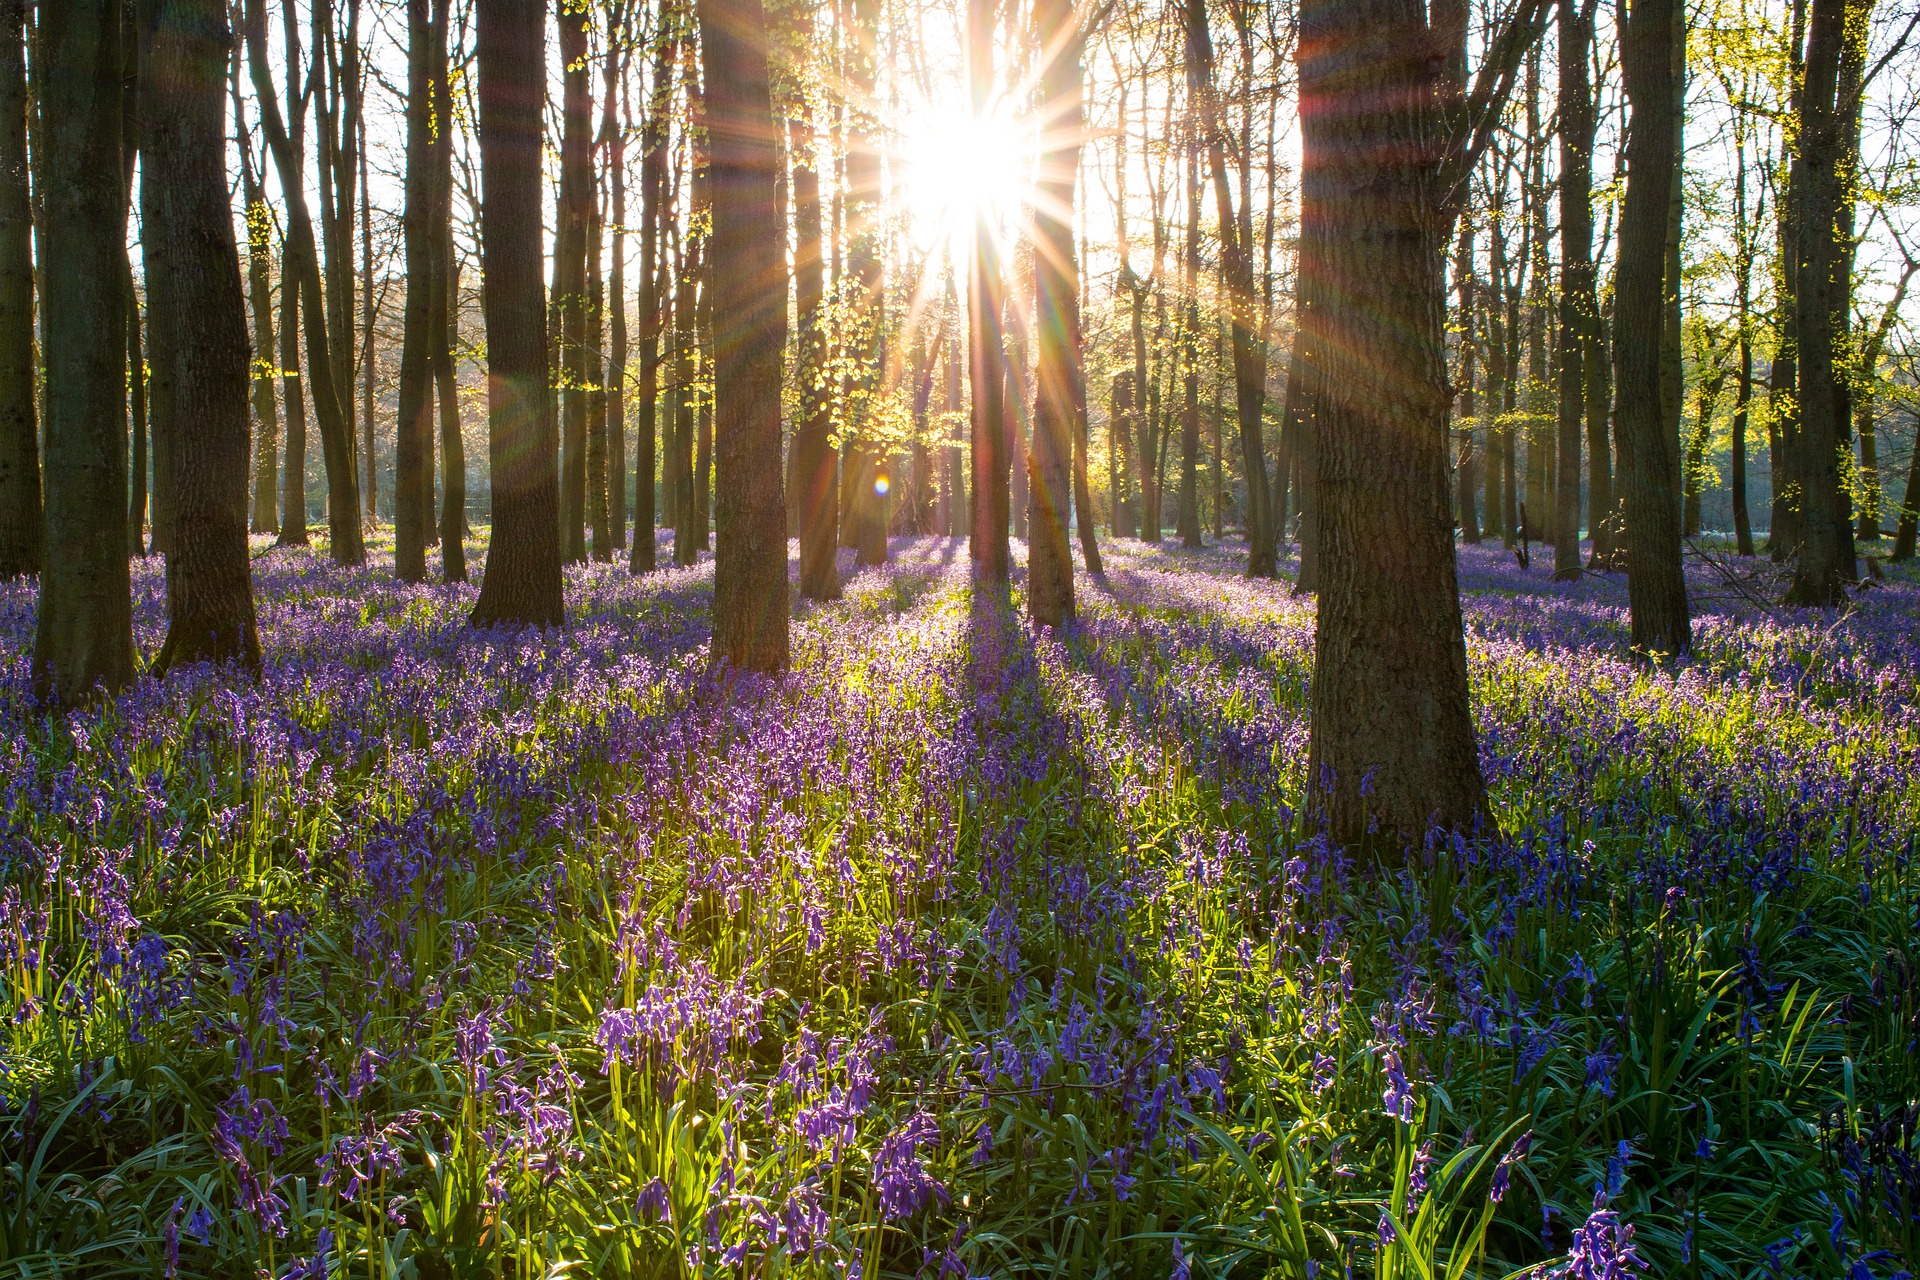 Forest at sunrise with bluebells beneath trees